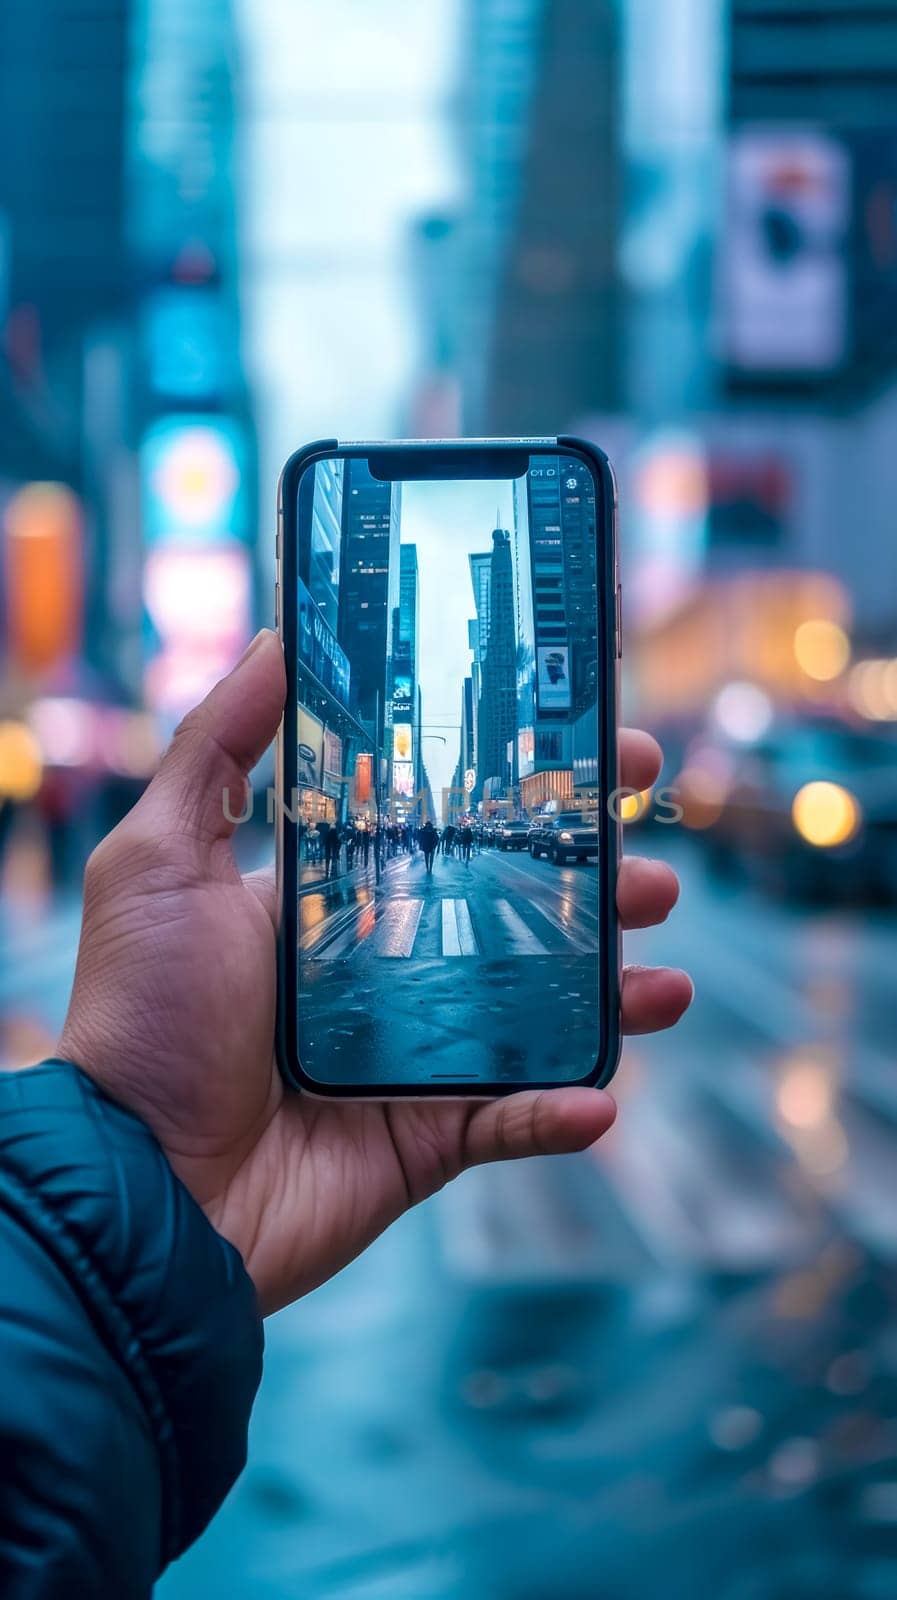 A hand holding a smartphone captures a bustling city street scene, displayed on the device's screen, juxtaposing the crisp digital image against the blurred reality in the background by Edophoto